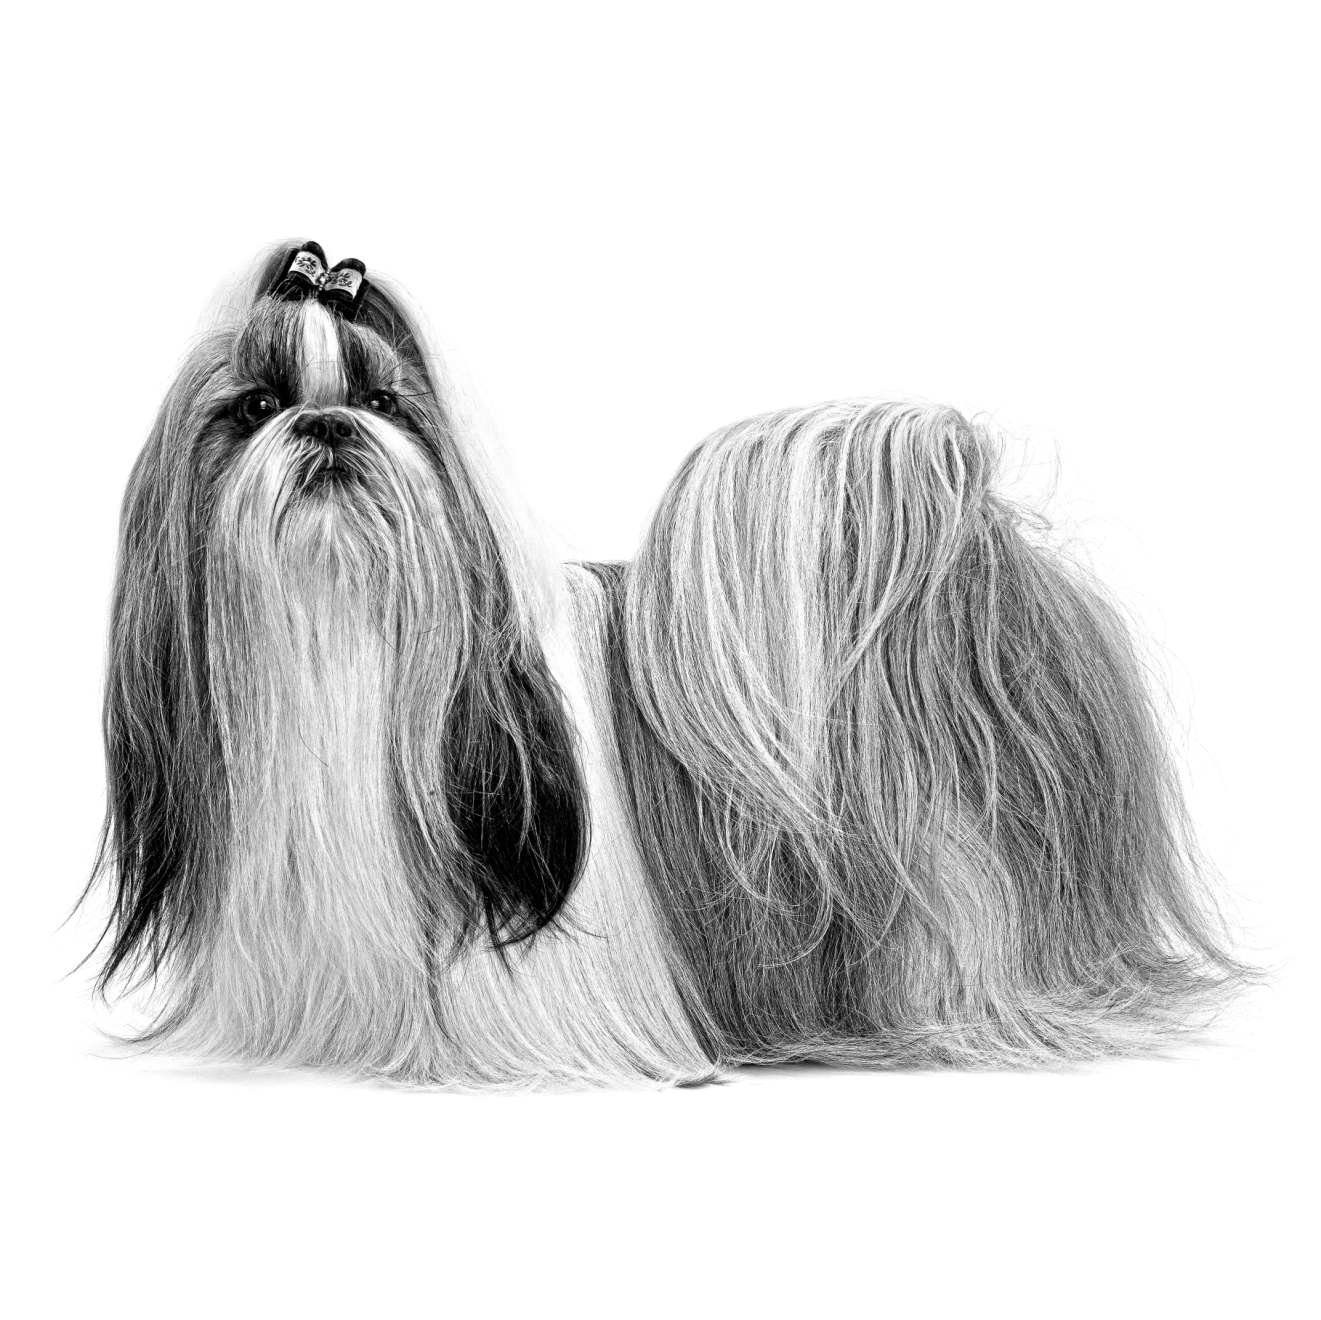 Shih Tzu with long hair sitting in black and white